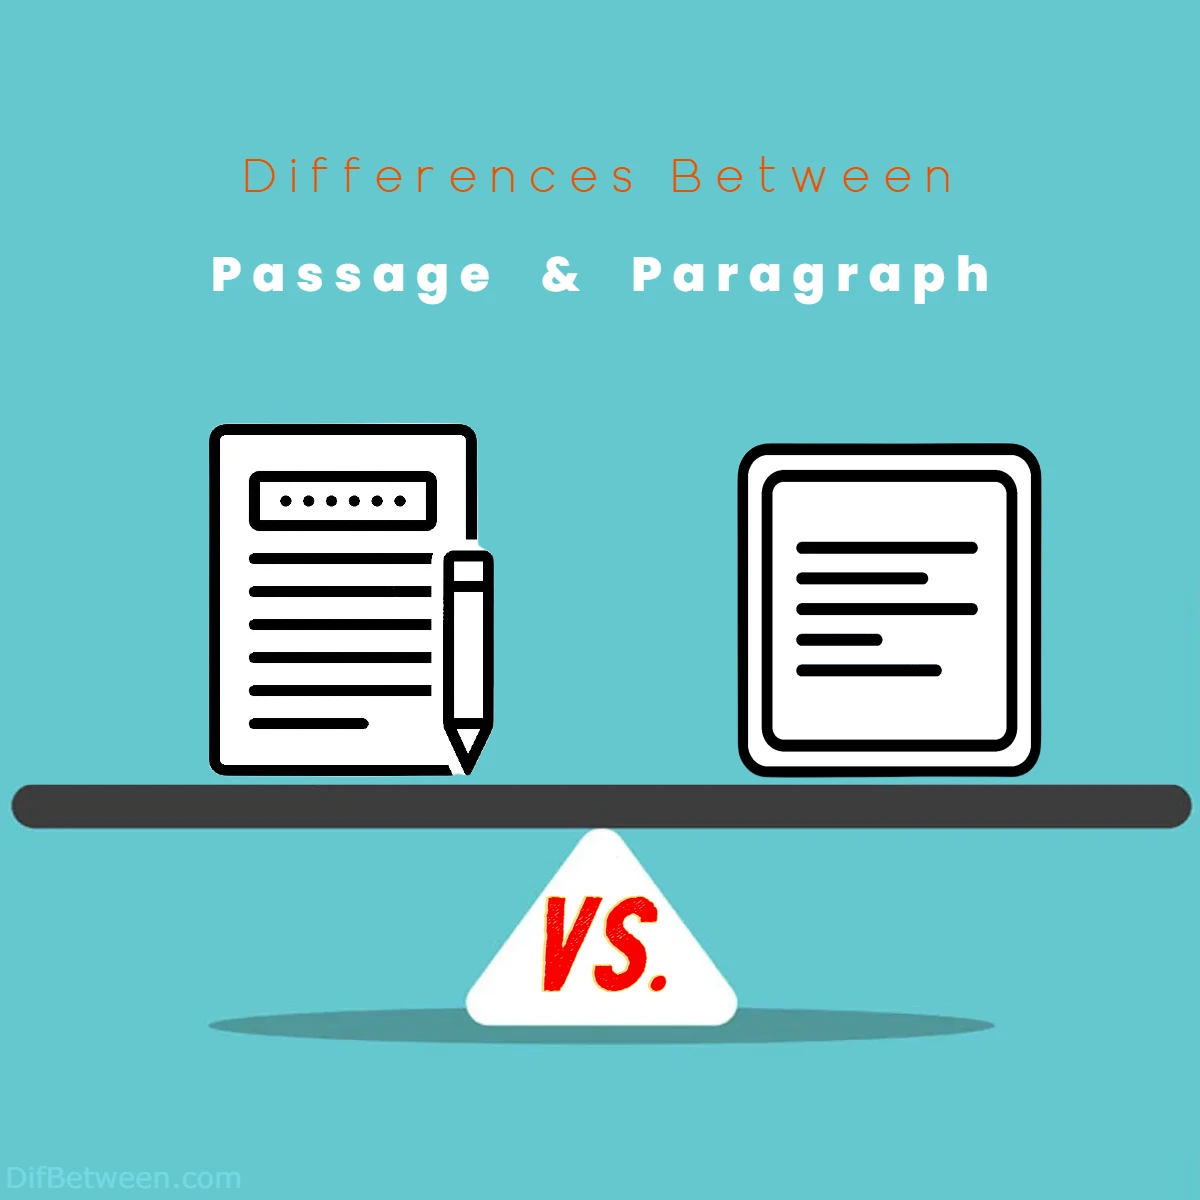 Differences Between Passage vs Paragraph